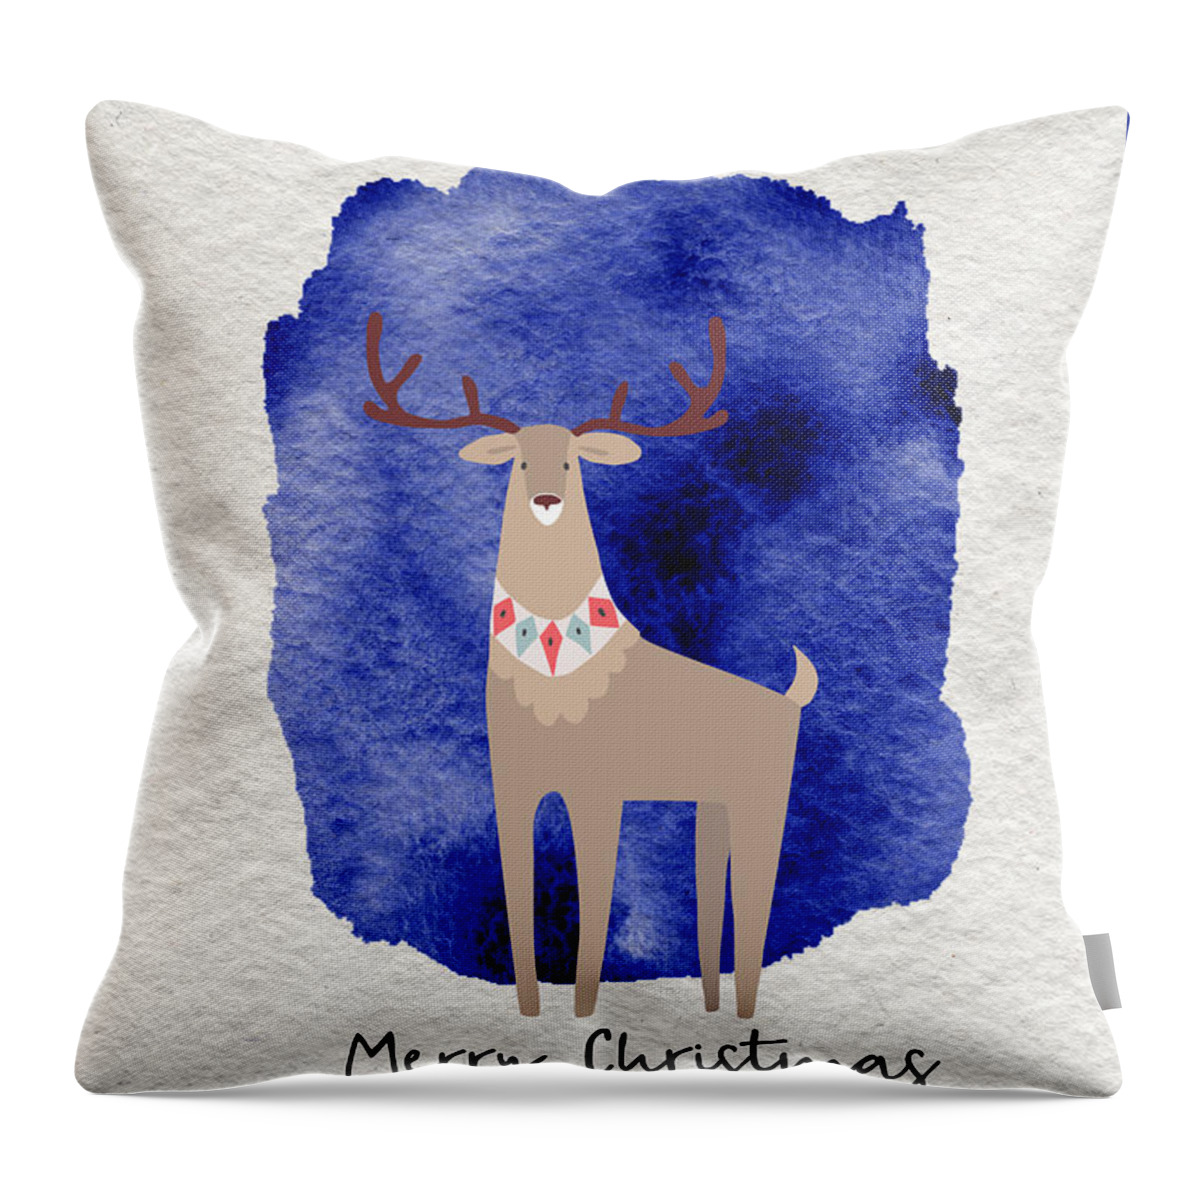 Merry Christmas Throw Pillow featuring the painting Merry Christmas Blue Watercolor Deer by Modern Art